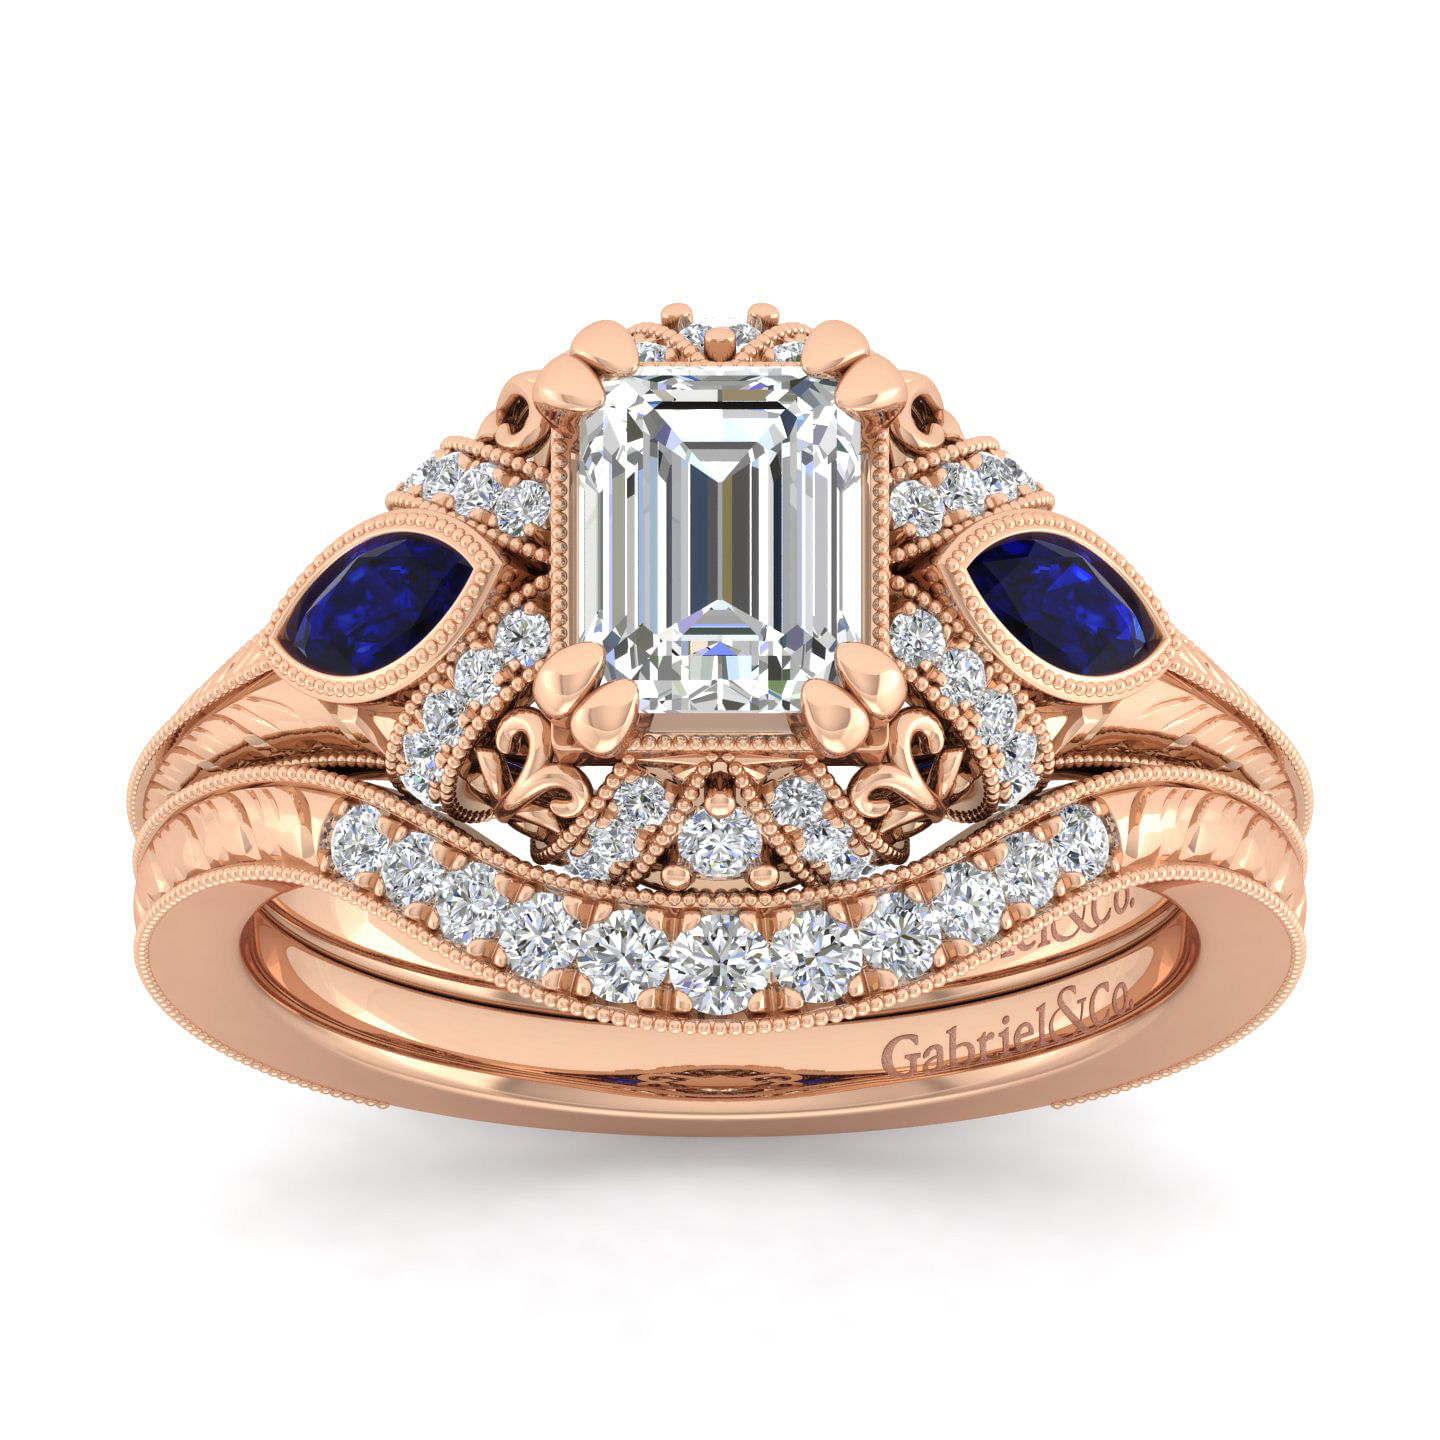 14K Rose Gold Emerald Cut Sapphire and Diamond Engagement Ring